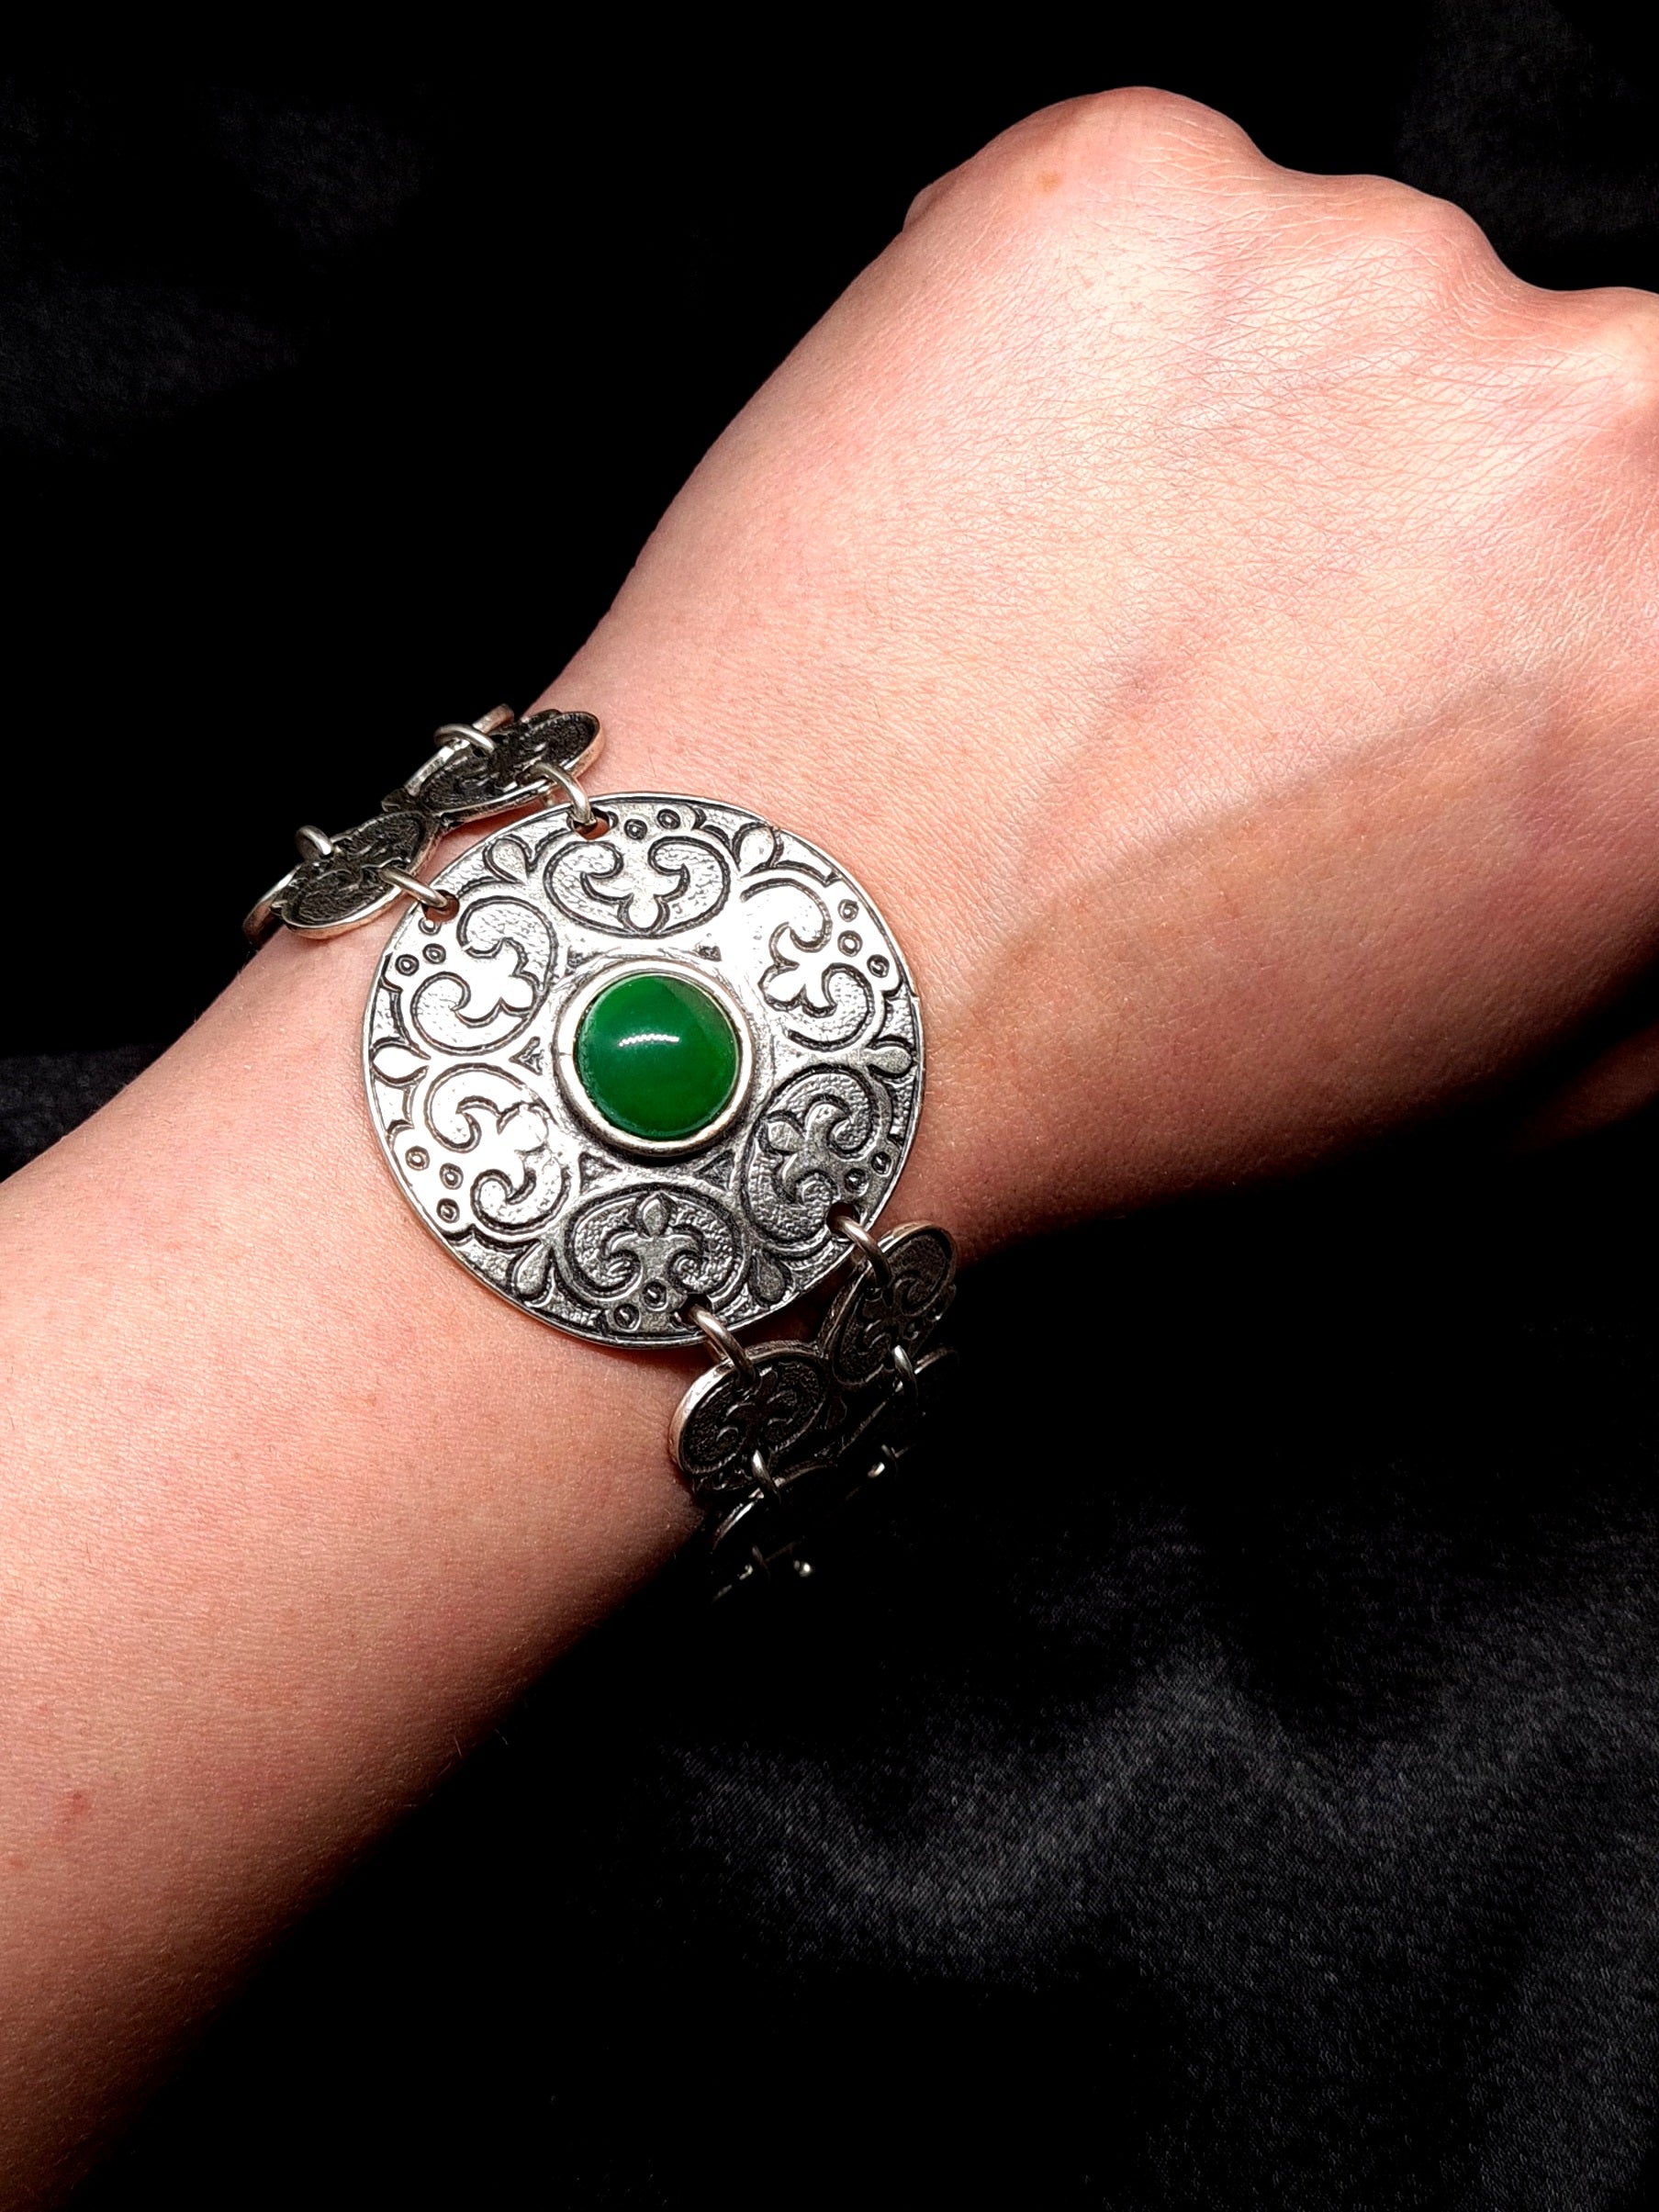 A silver bracelet with a green stone in the center. The bracelet is made of silver and has a delicate design. The green stone is oval-shaped and has a smooth finish. The bracelet is on a woman's wrist.